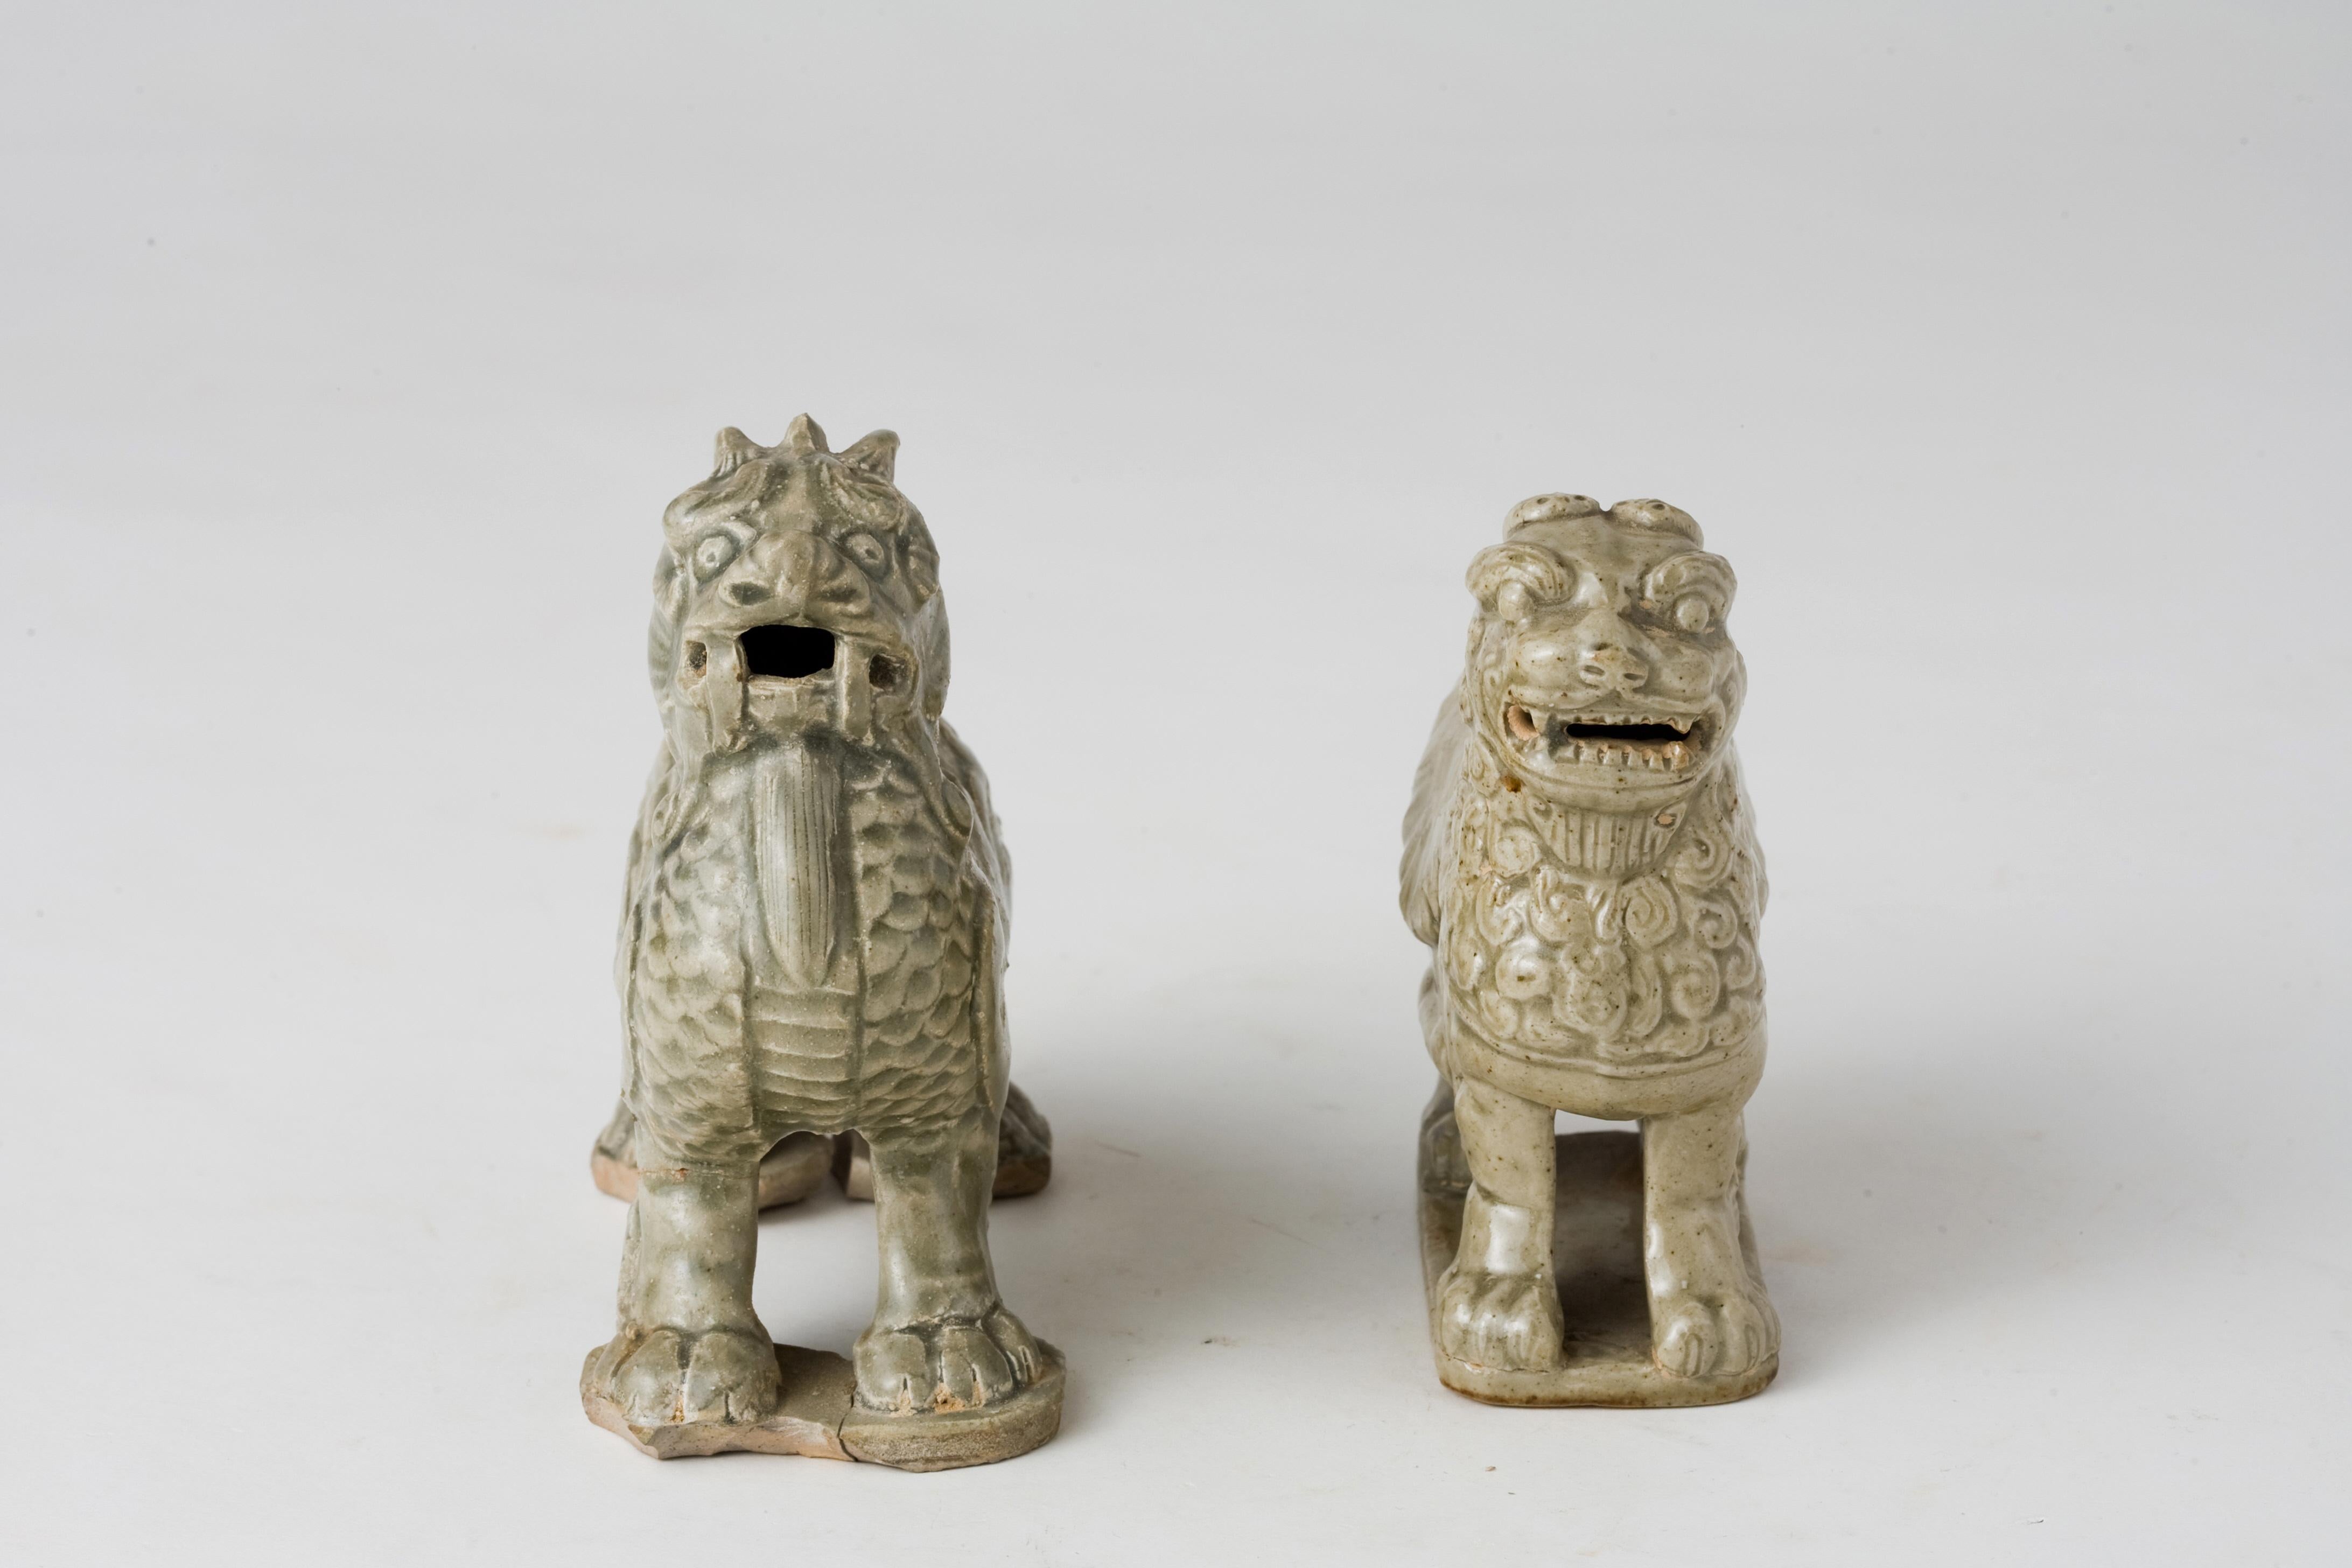 * Set item(Two statues)

The statue on the left seems to be a mythical beast standing in a poised and alert stance, with its mouth open as if roaring or breathing fire. Its body is covered in detailed carvings that resemble scales and feathers,